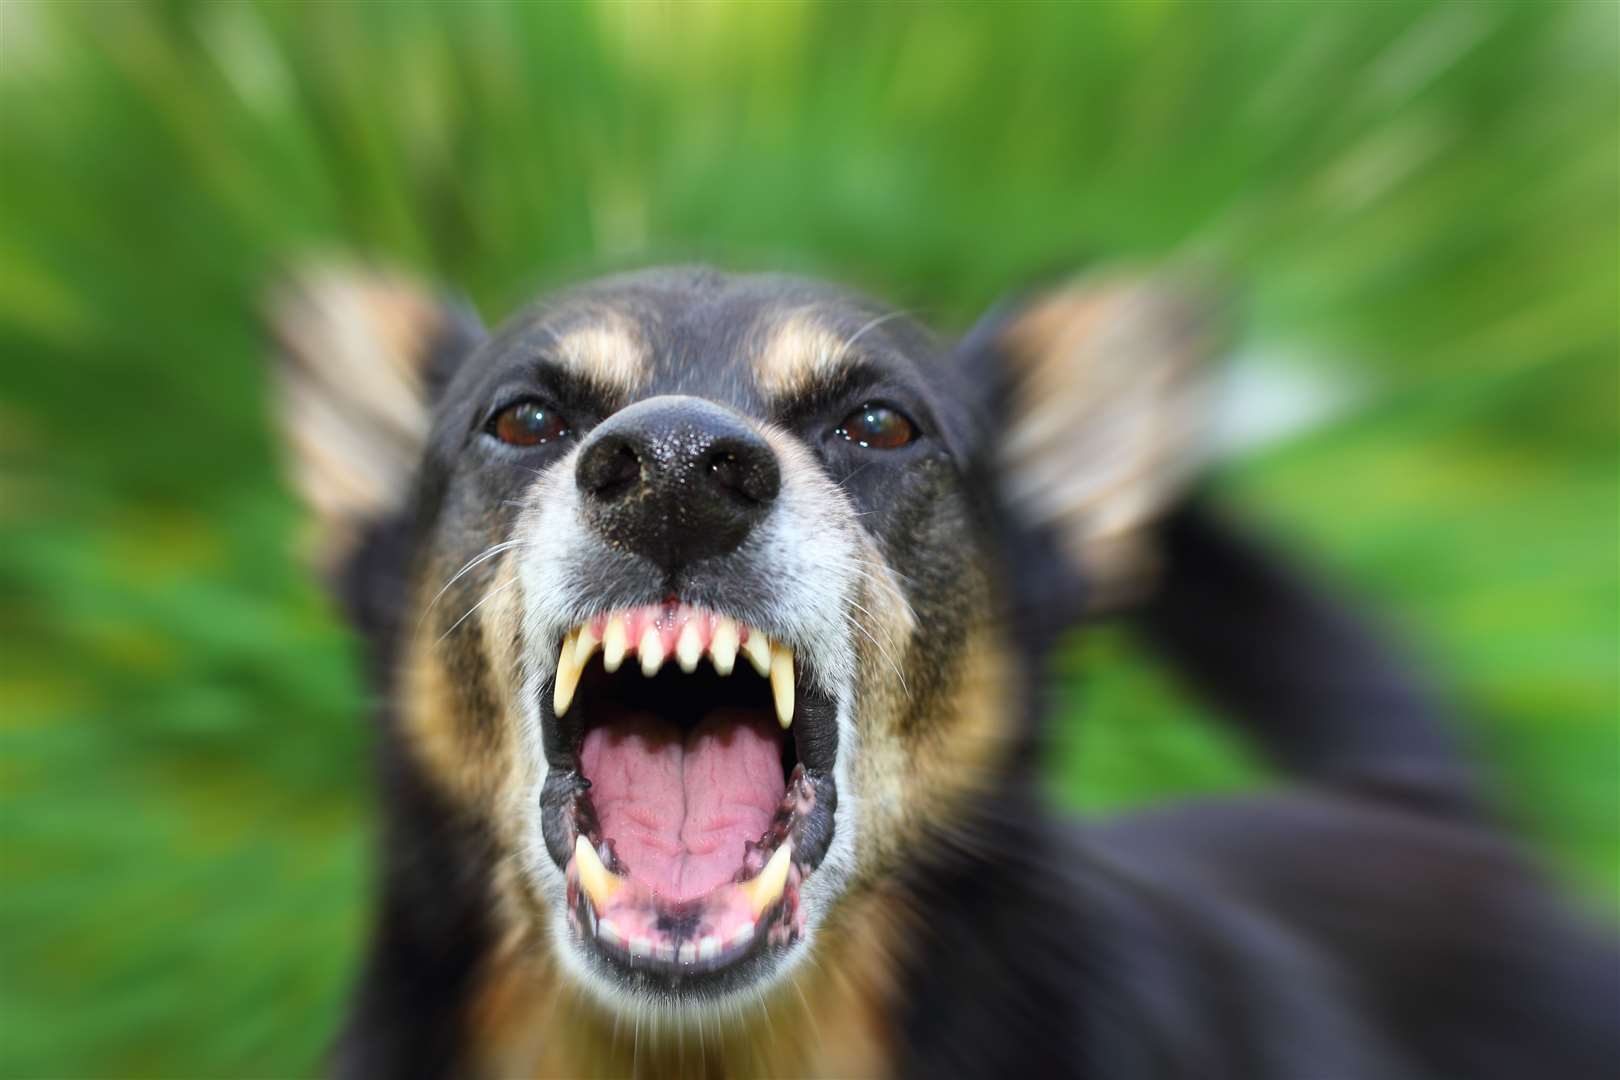 Of witnesses urged to report dog attacks – just 18 per cent say they would call the police and only 15 per cent would report it to a farmer. Picture: AdobeStock